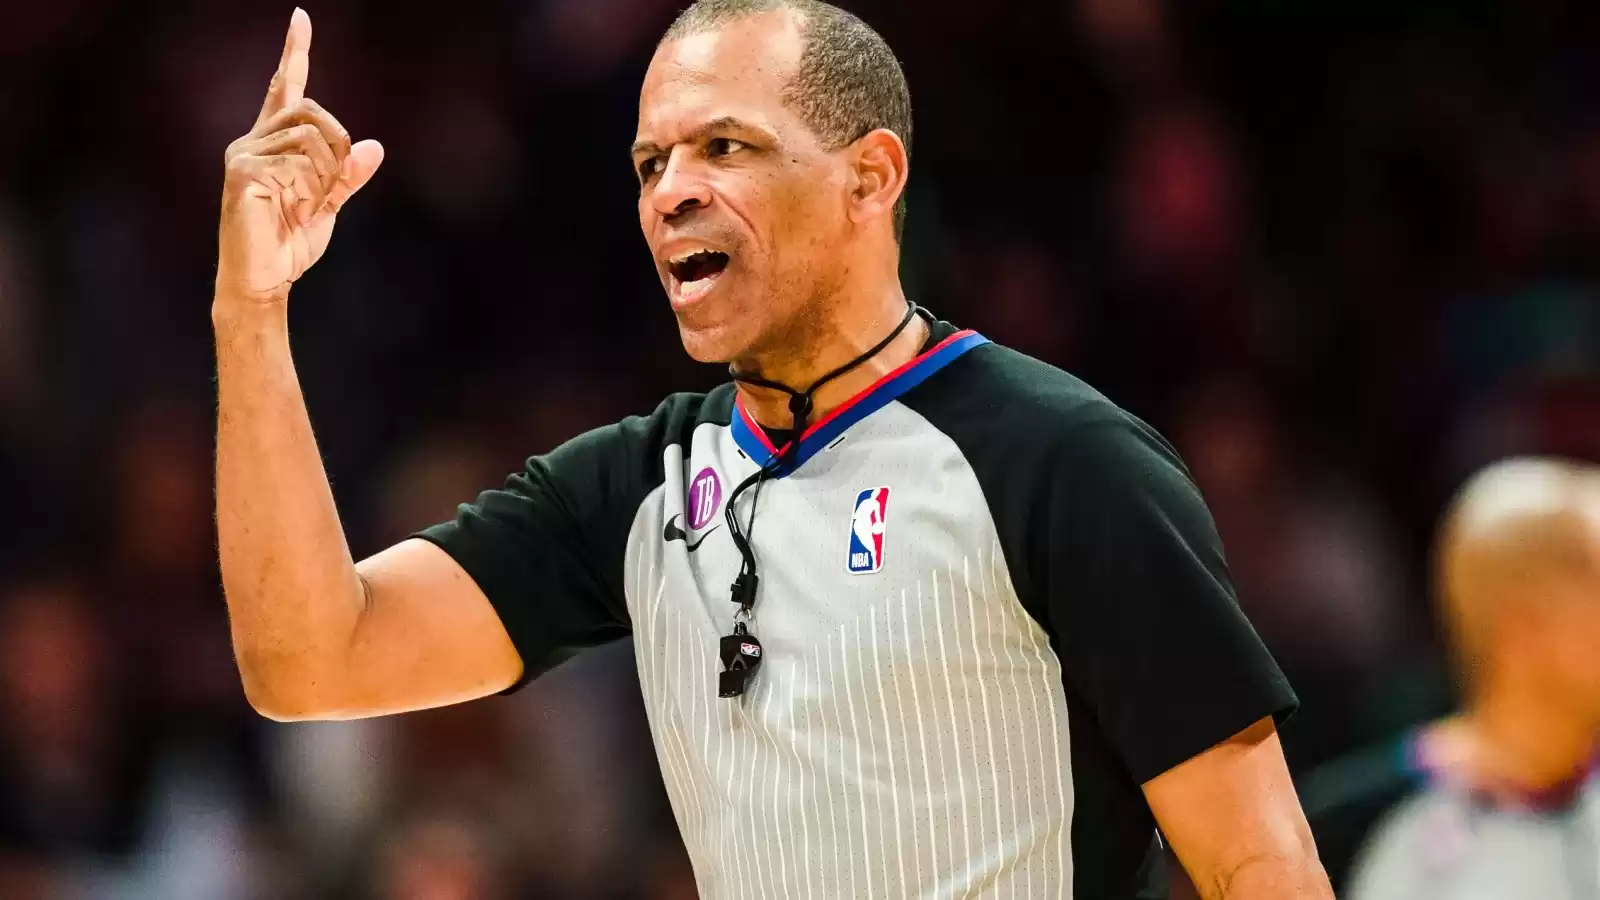 "Social Media Reacts to NBA Referee Eric Lewis' Sudden Retirement Amid Probe"